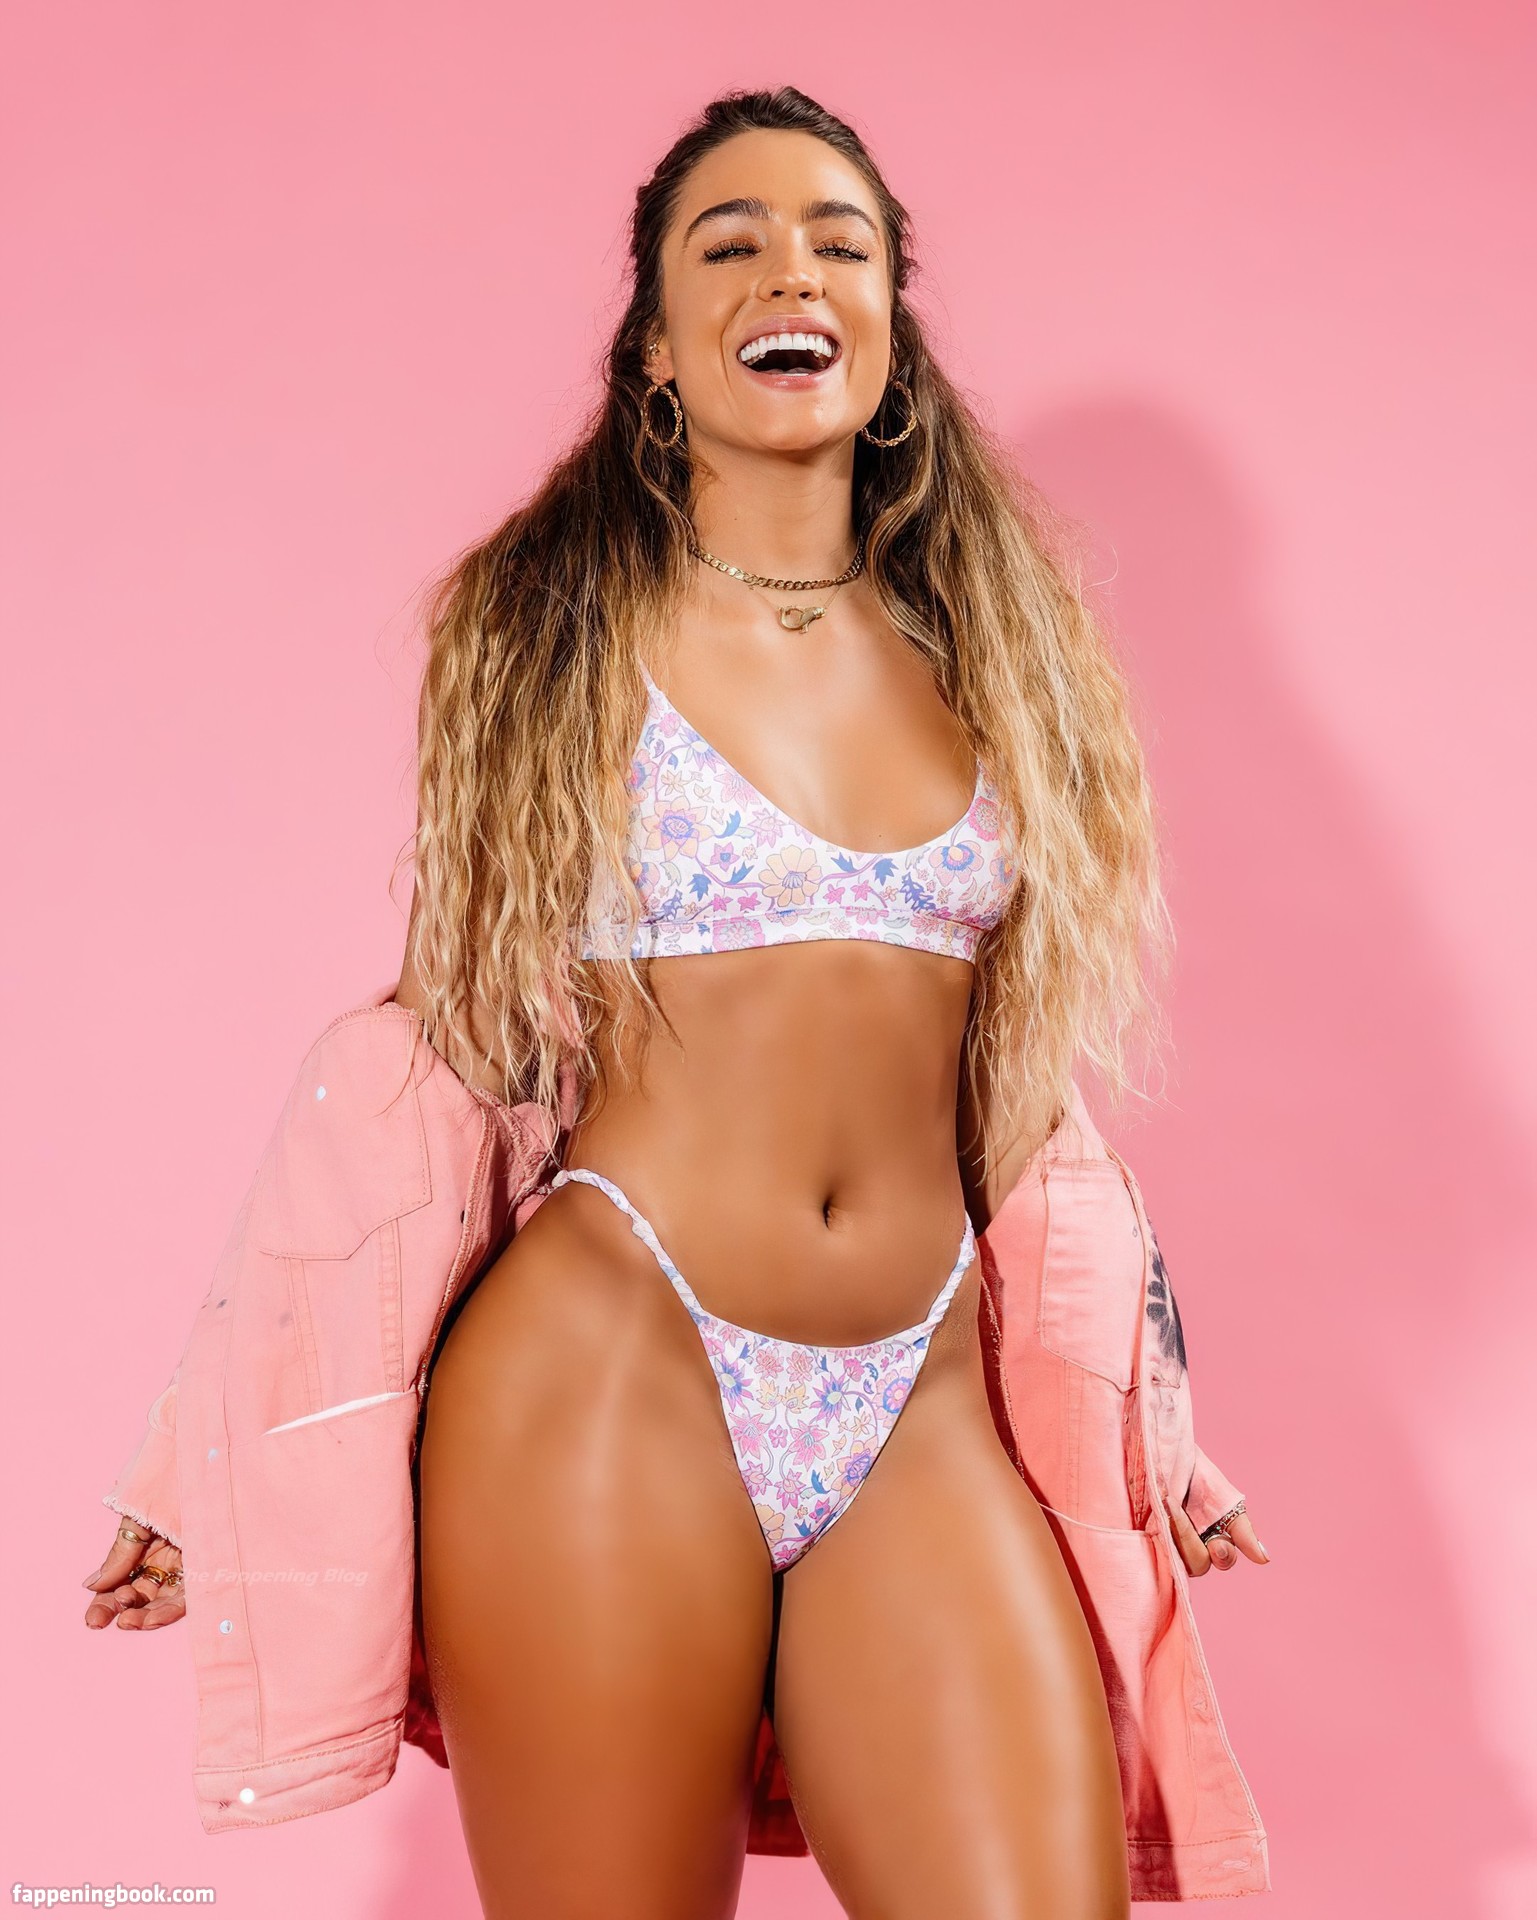 Sommer Ray Fappening photo 10